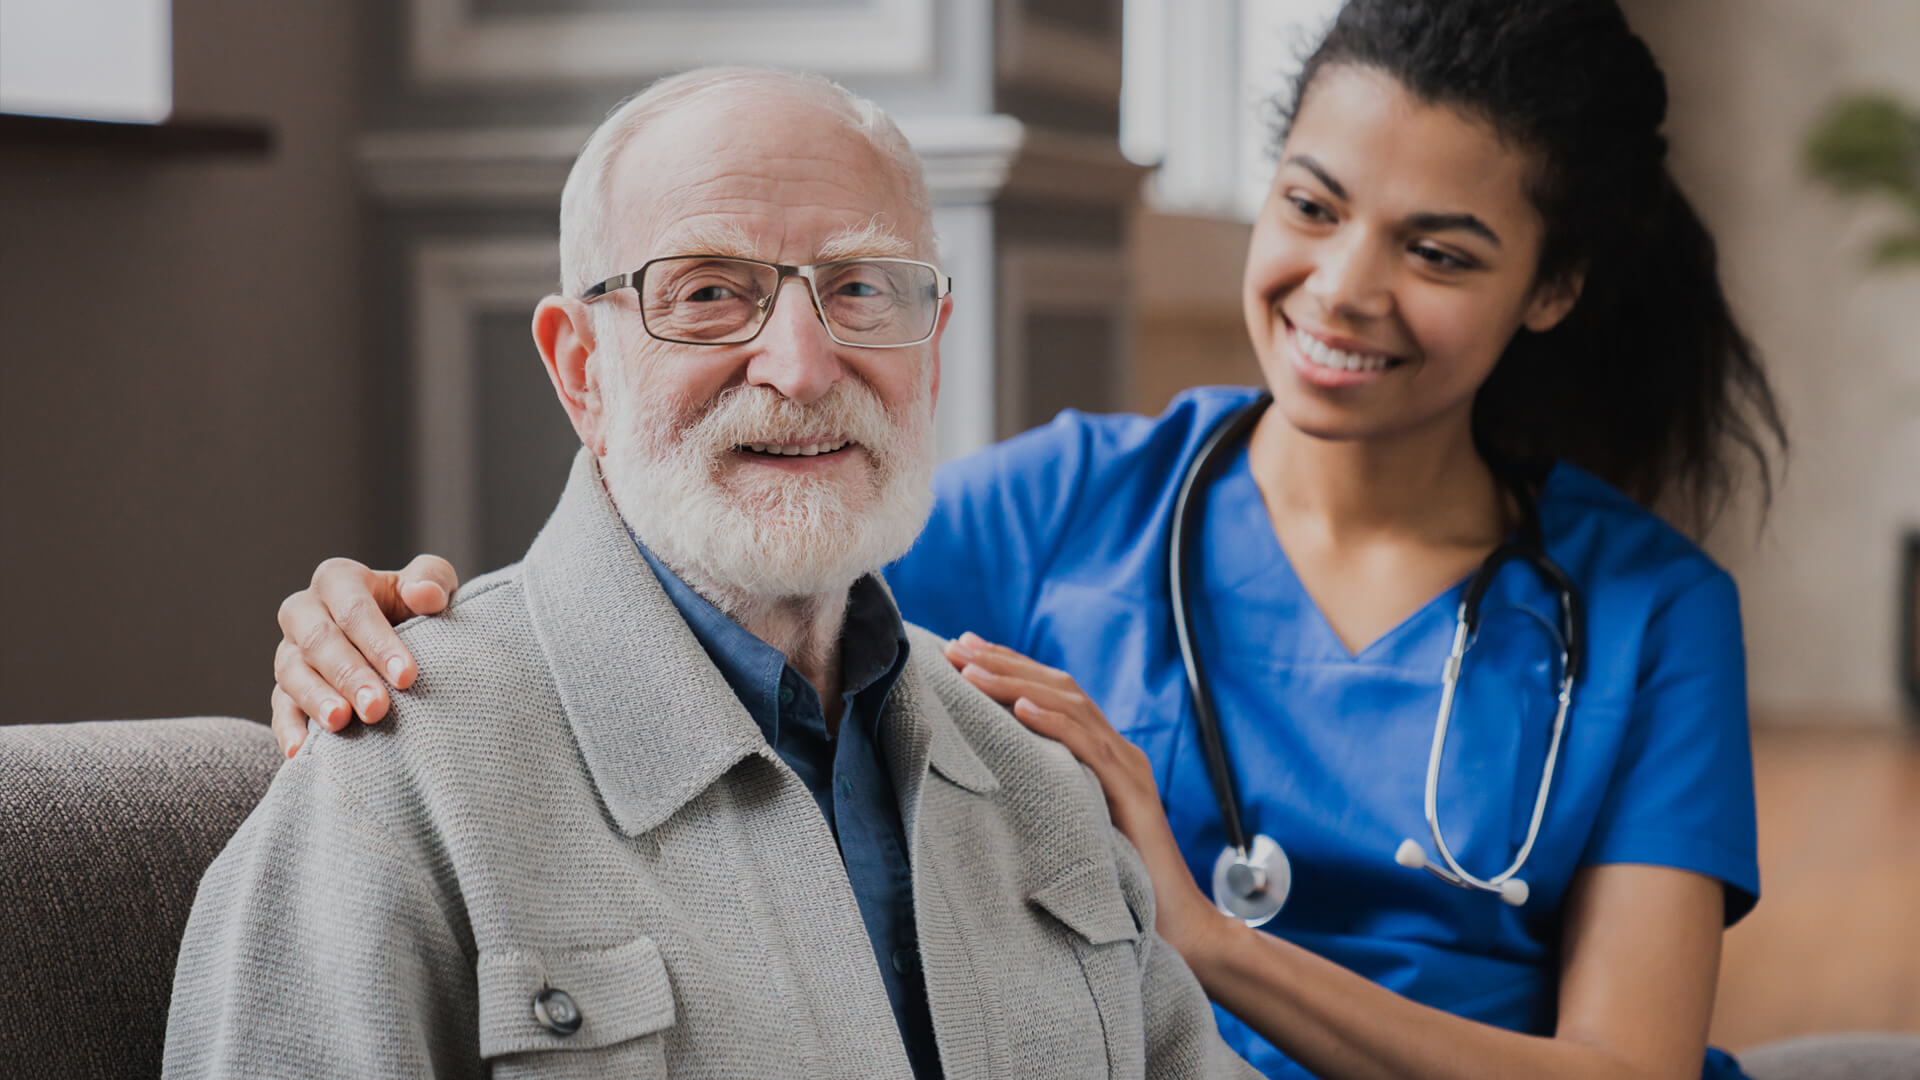 Smiling nurse in blue scrubs comforts a smiling elderly male patient.